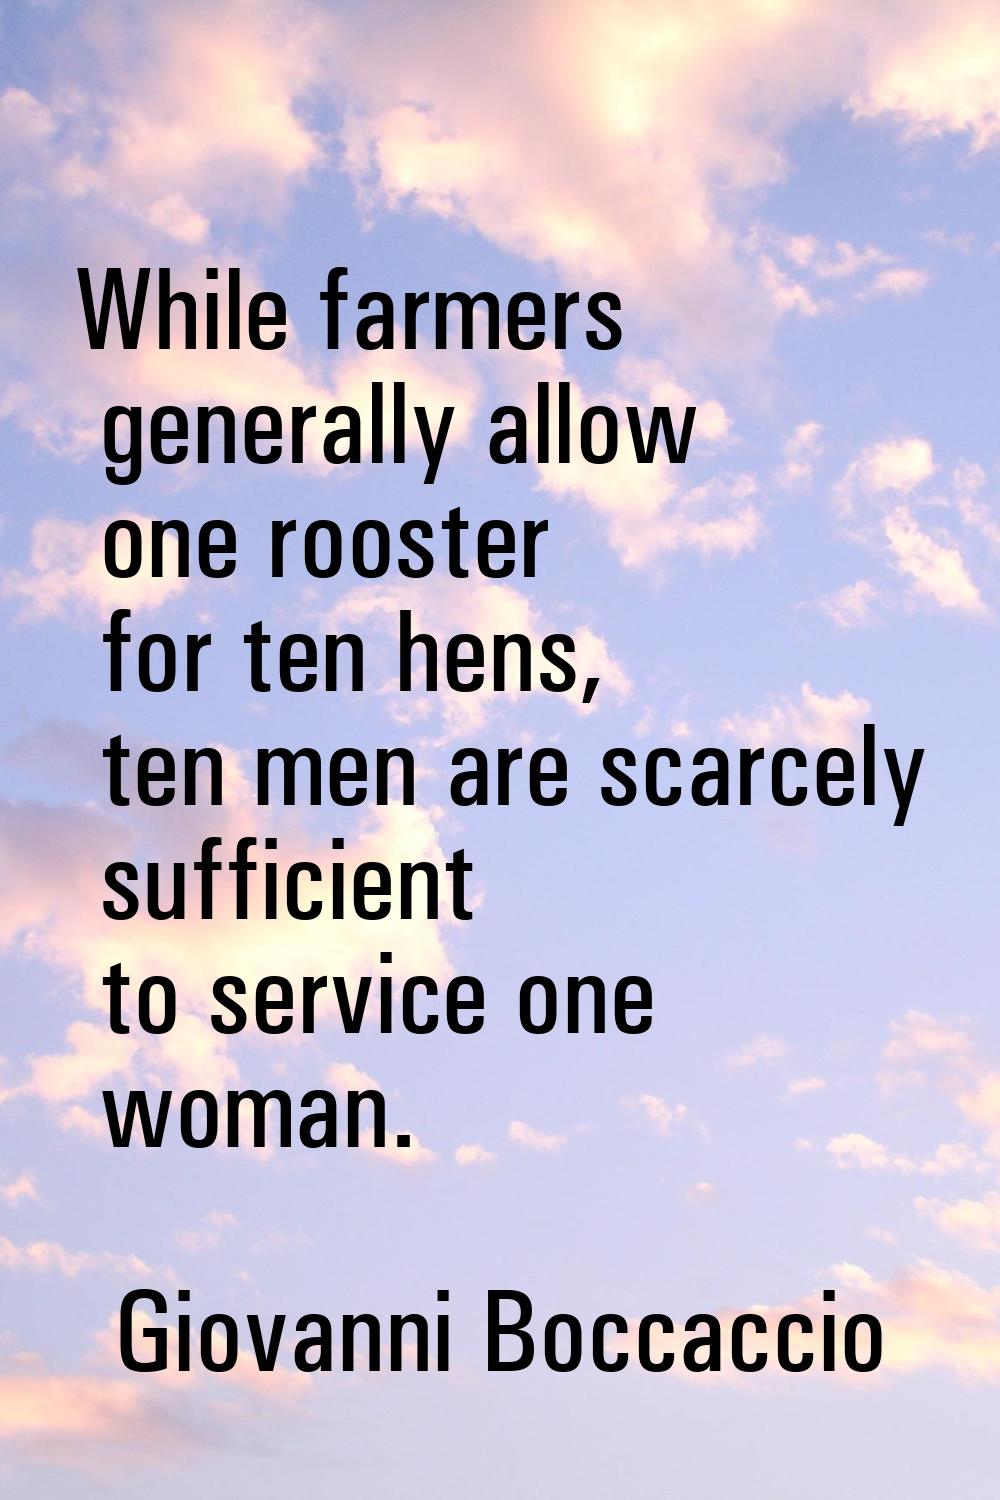 While farmers generally allow one rooster for ten hens, ten men are scarcely sufficient to service 